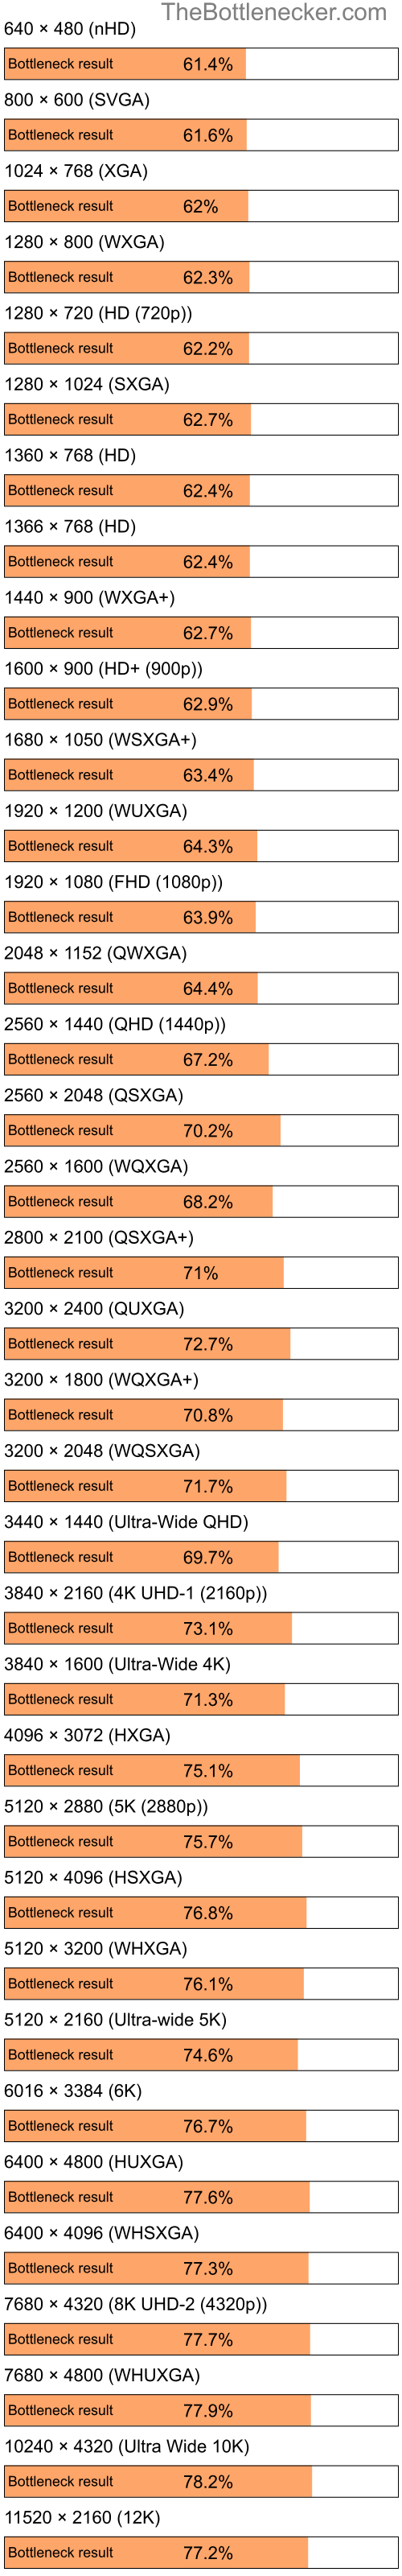 Bottleneck results by resolution for Intel Pentium 4 and AMD Mobility Radeon HD 2300 in Processor Intense Tasks